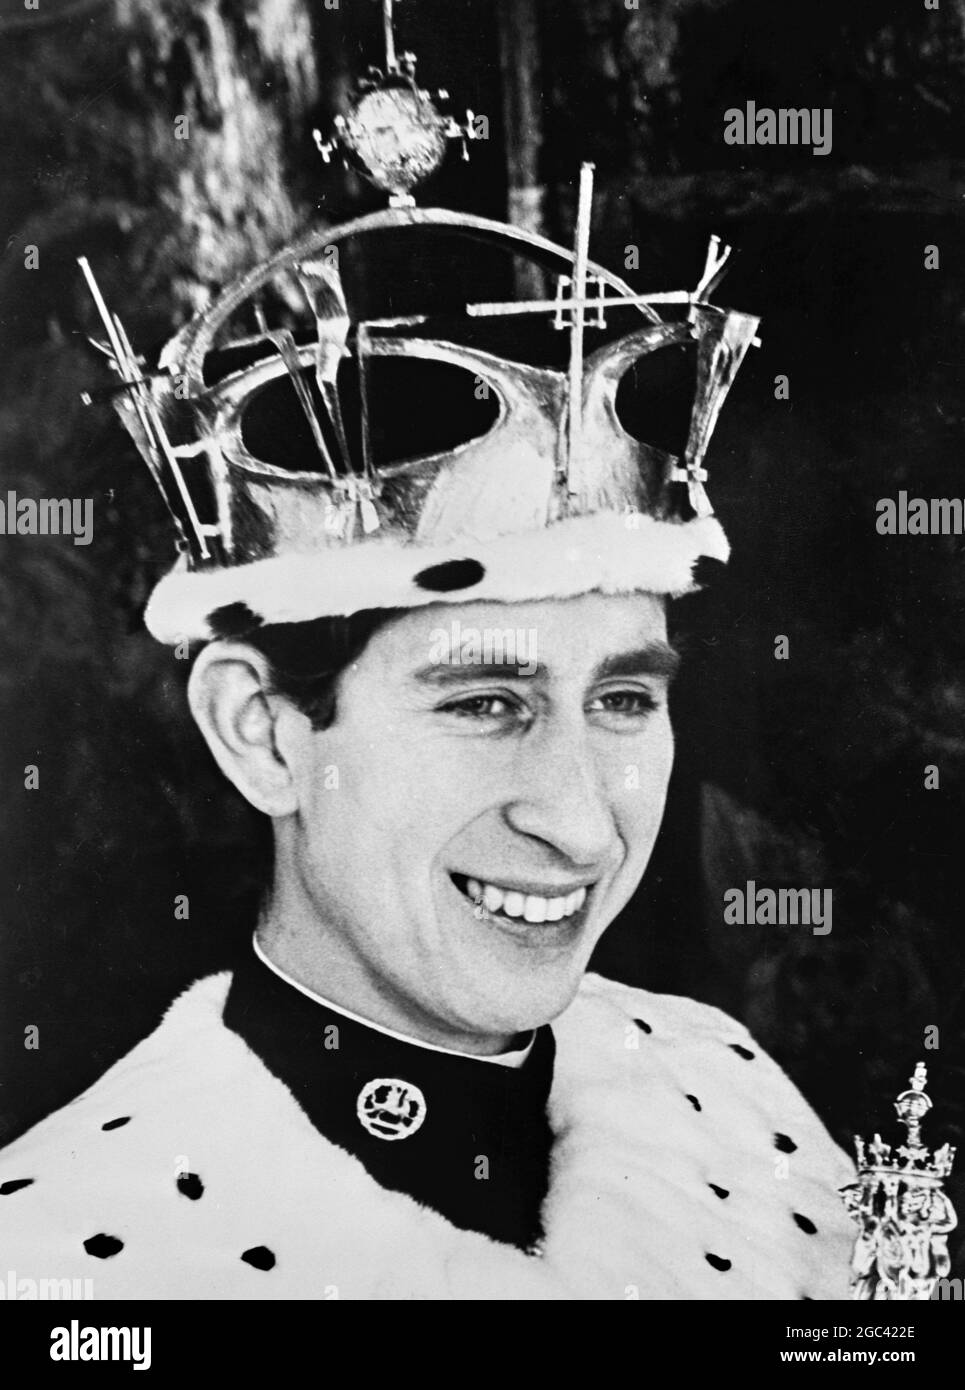 The official picture of Prince Charles, who will become the Prince of Wales, at a ceremony to be performed by Her Majesty Queen Elizabeth II at Caernarvon Castle, Wales on 1 July 1969. The Prince of Wales, pictured by Norman Parkinson at Windsor Castle, Berkshire is wearing his full regalia. Over a military uniform he wears an ermine robe. On his head is the Gold Coronet, weighing 3lbs and containing 75 diamonds and 12 emeralds. 25 June 1969 Stock Photo